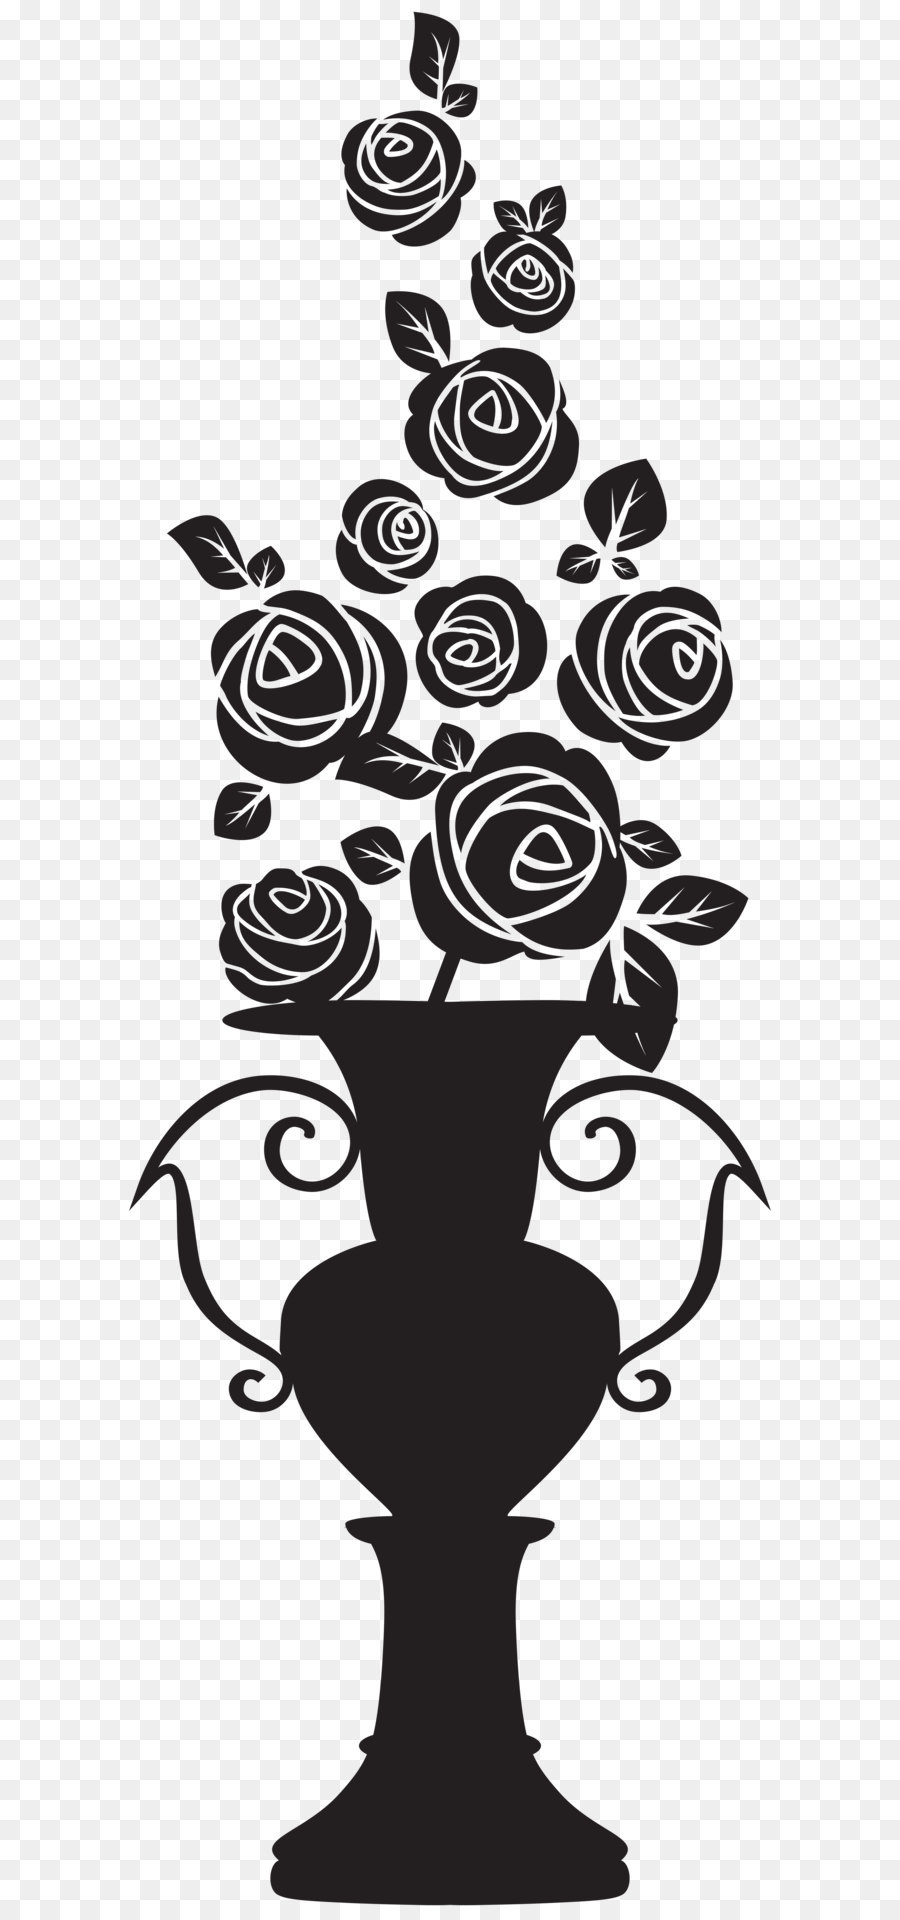 Silhouette Drawing Clip art - Vase with Roses Silhouette PNG Clip Art Image png download - 2712*8000 - Free Transparent Silhouette png Download.